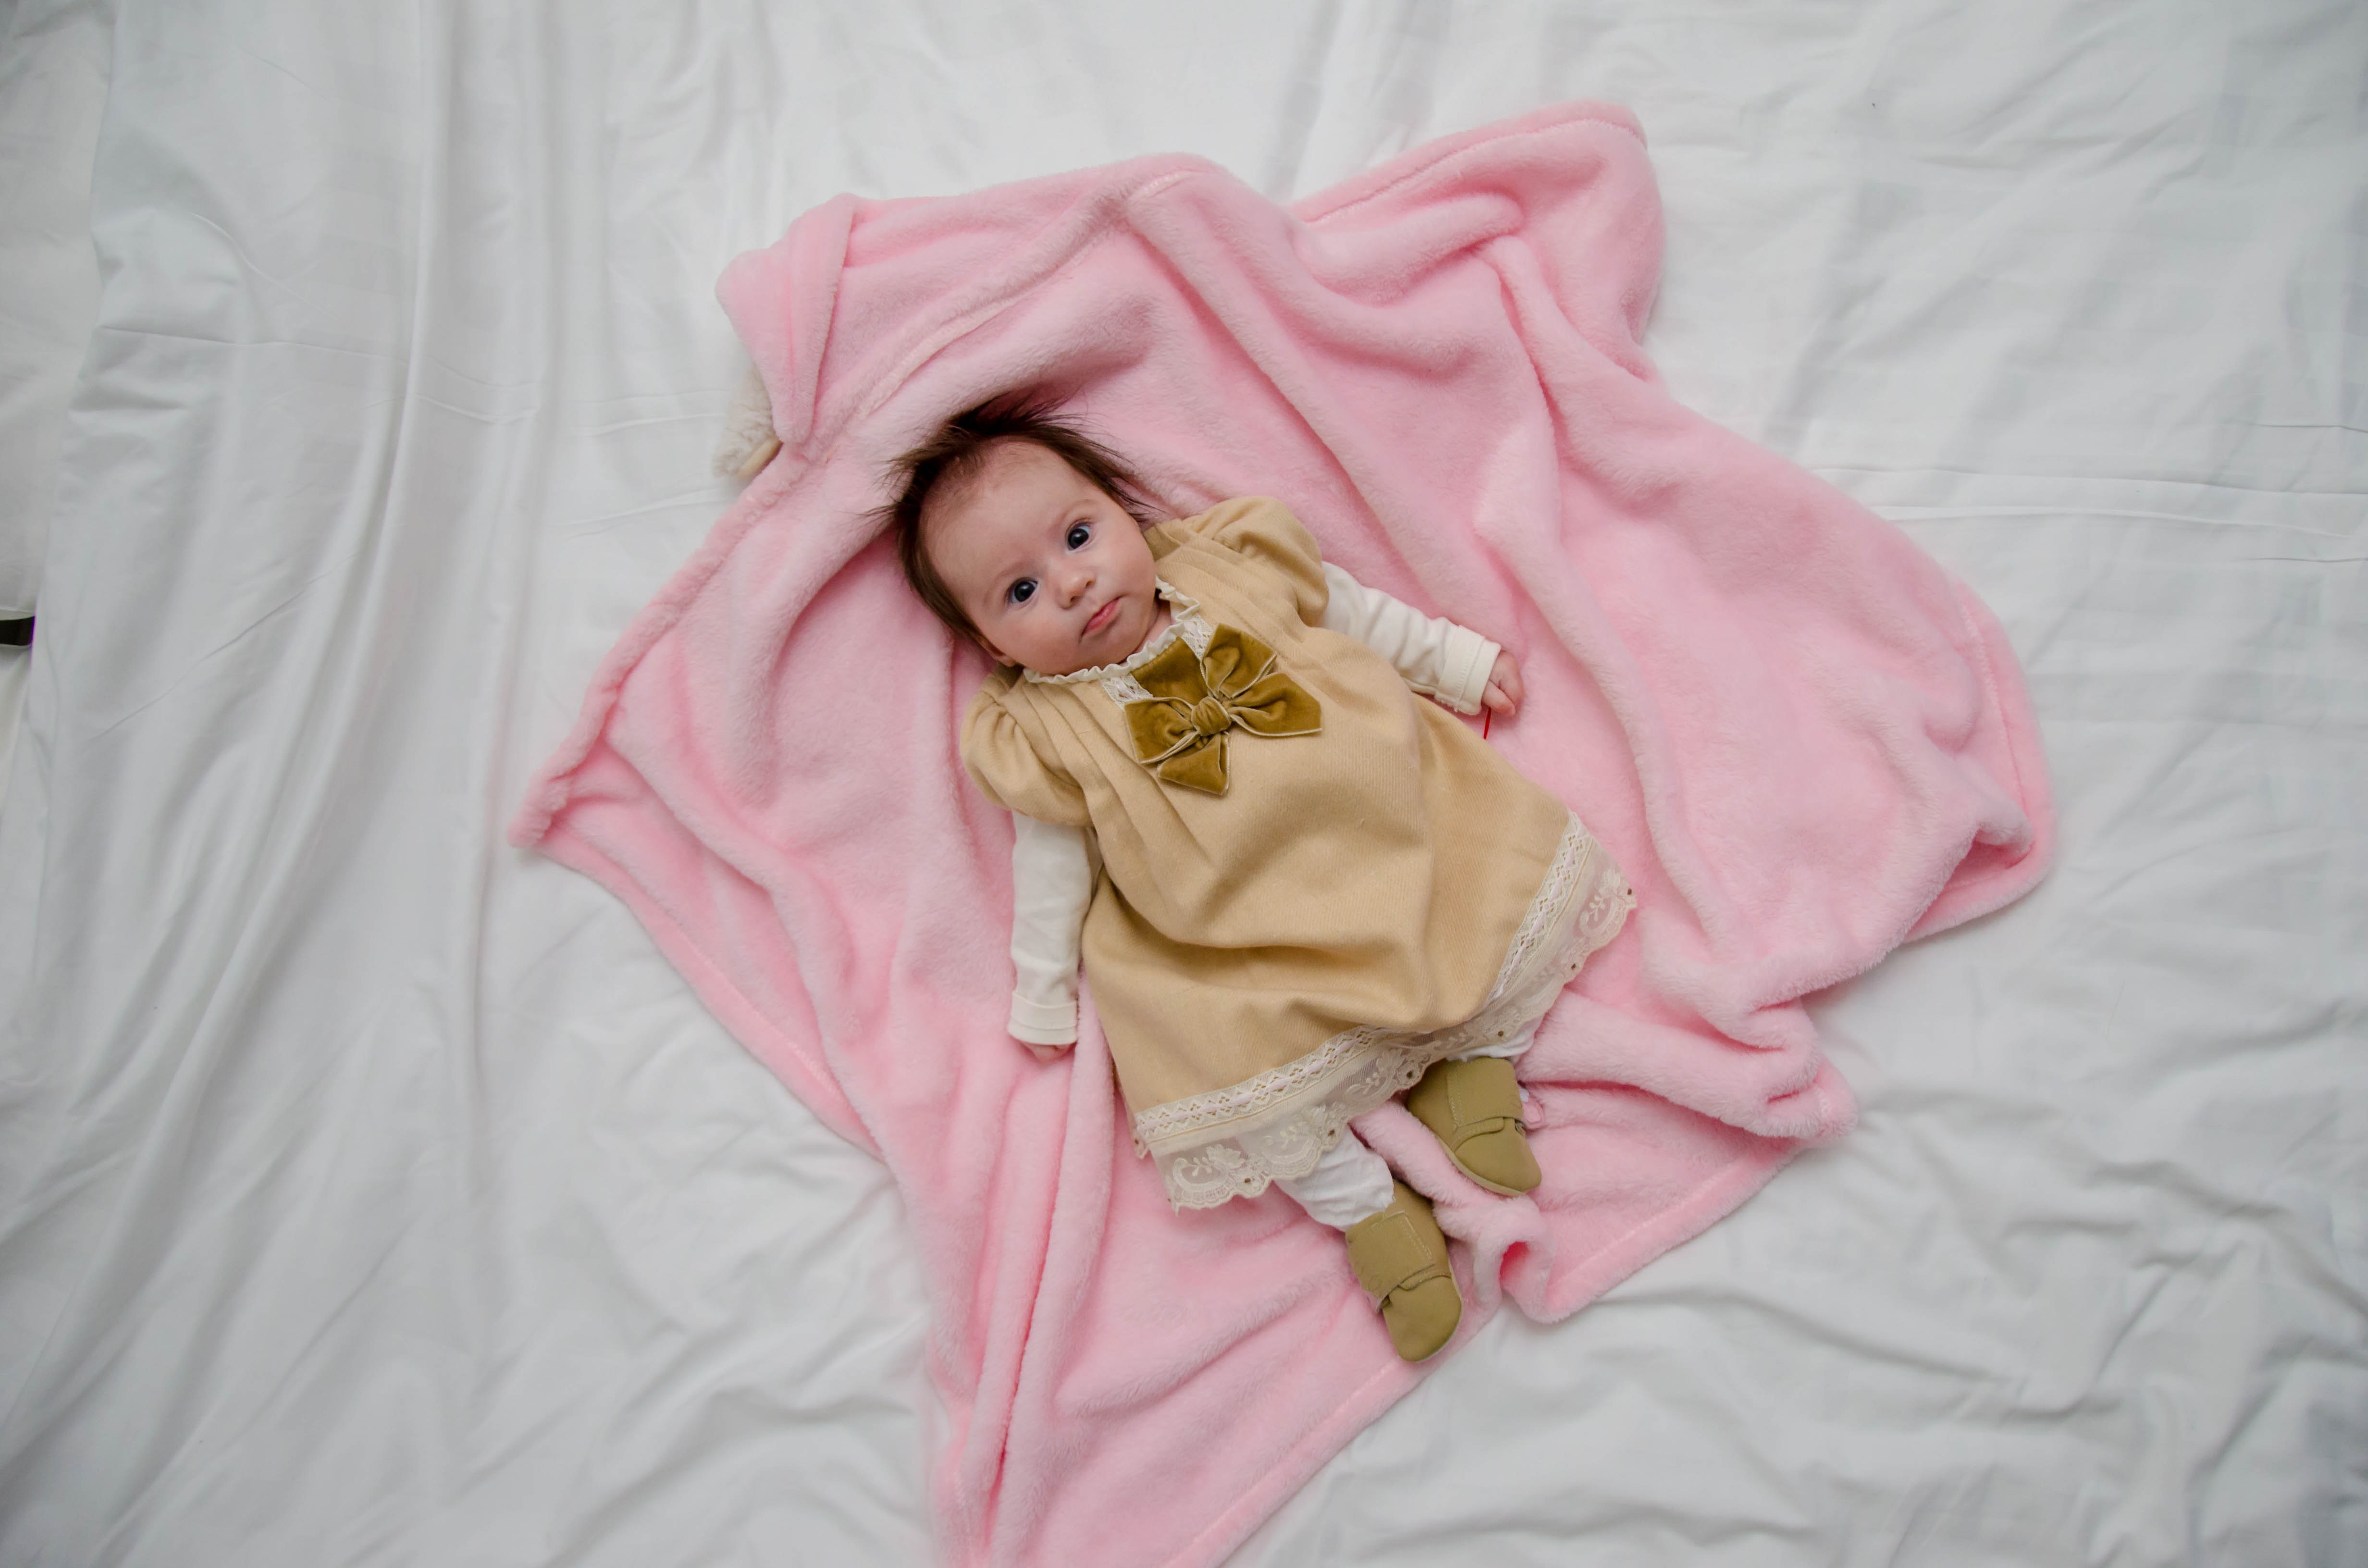 Baby in white and yellow dress on pink textile photo